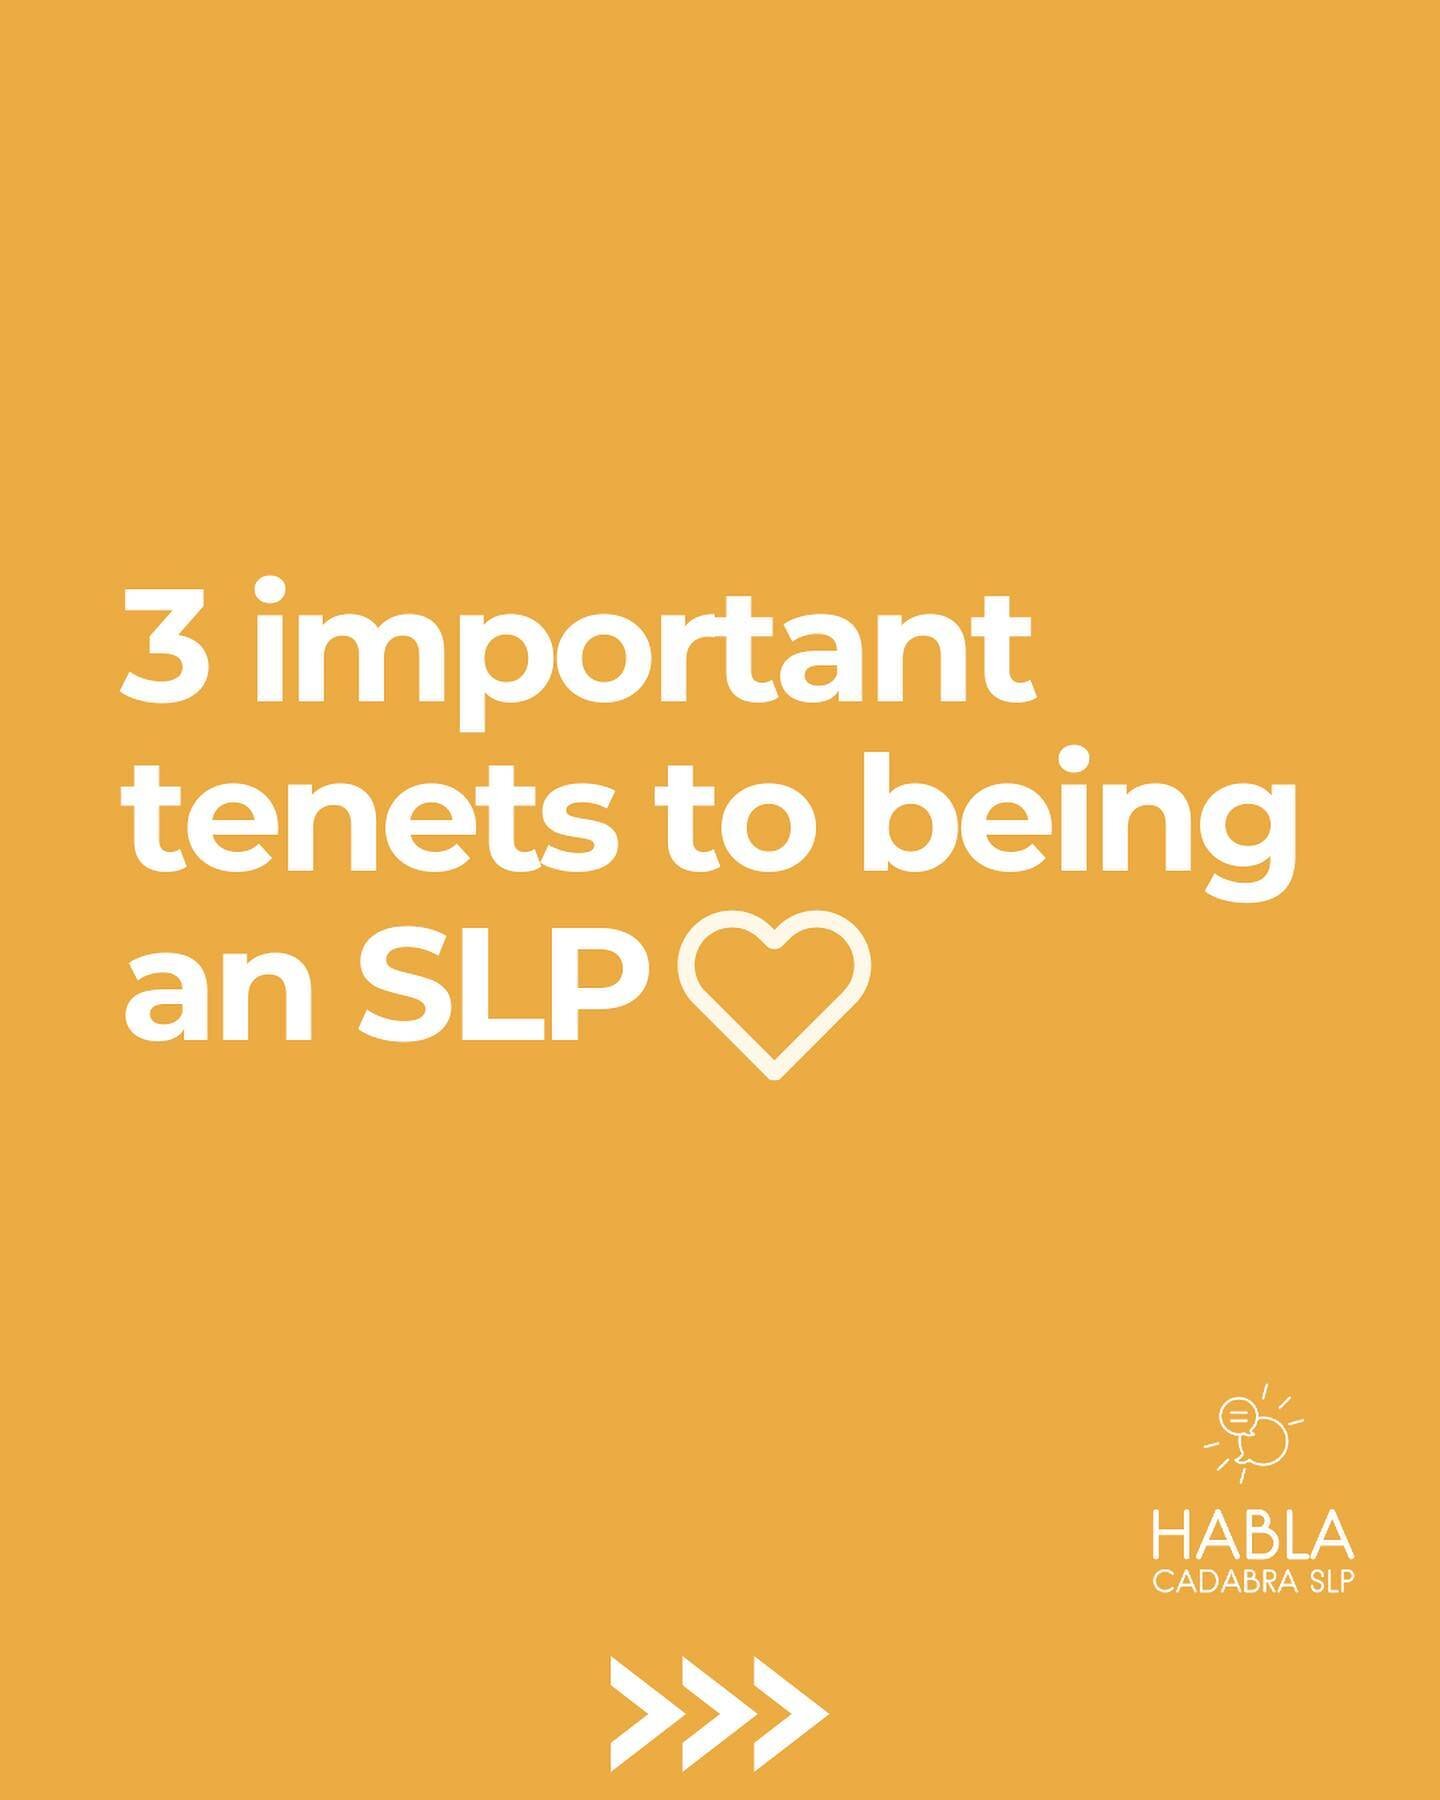 Happy SLP day to all of our SLPs out there!

For our team, being an SLP means supporting home languages, communication with the community, and building communication across contexts. 

It means we show up every day ready to give empathy, support, and